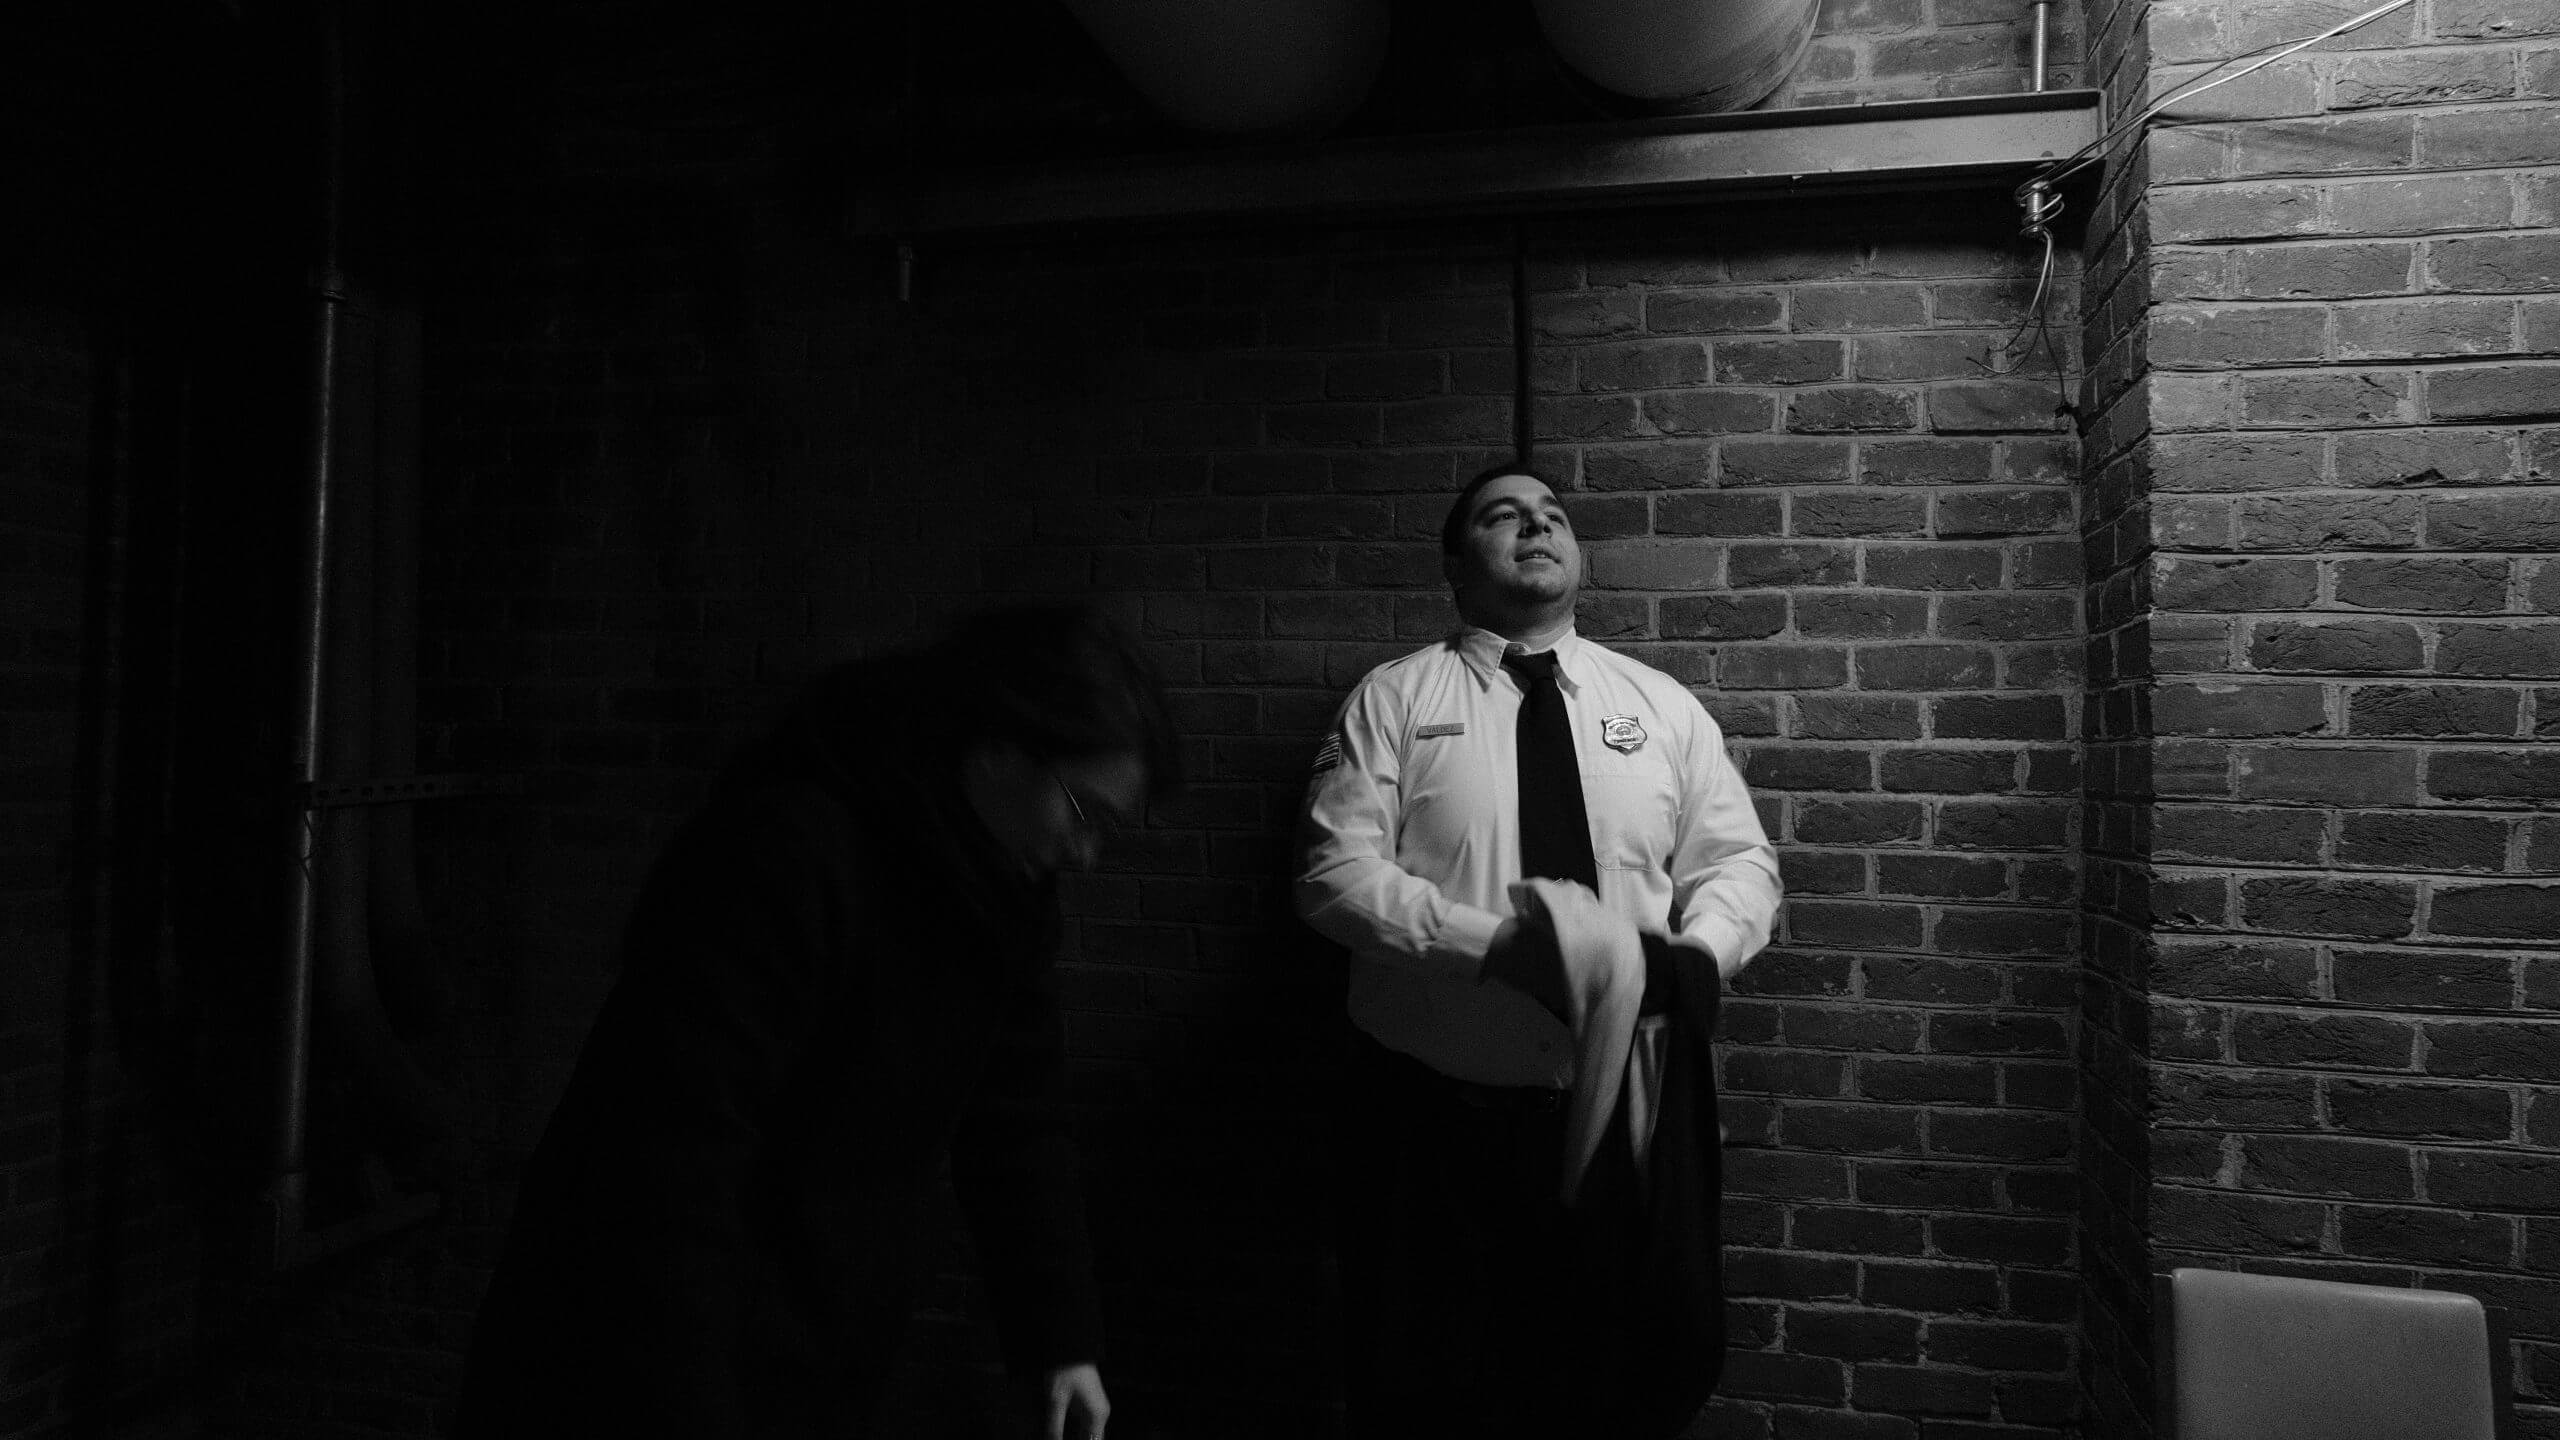 Medium shot of an actor dressed as a police officer looking up to the sky